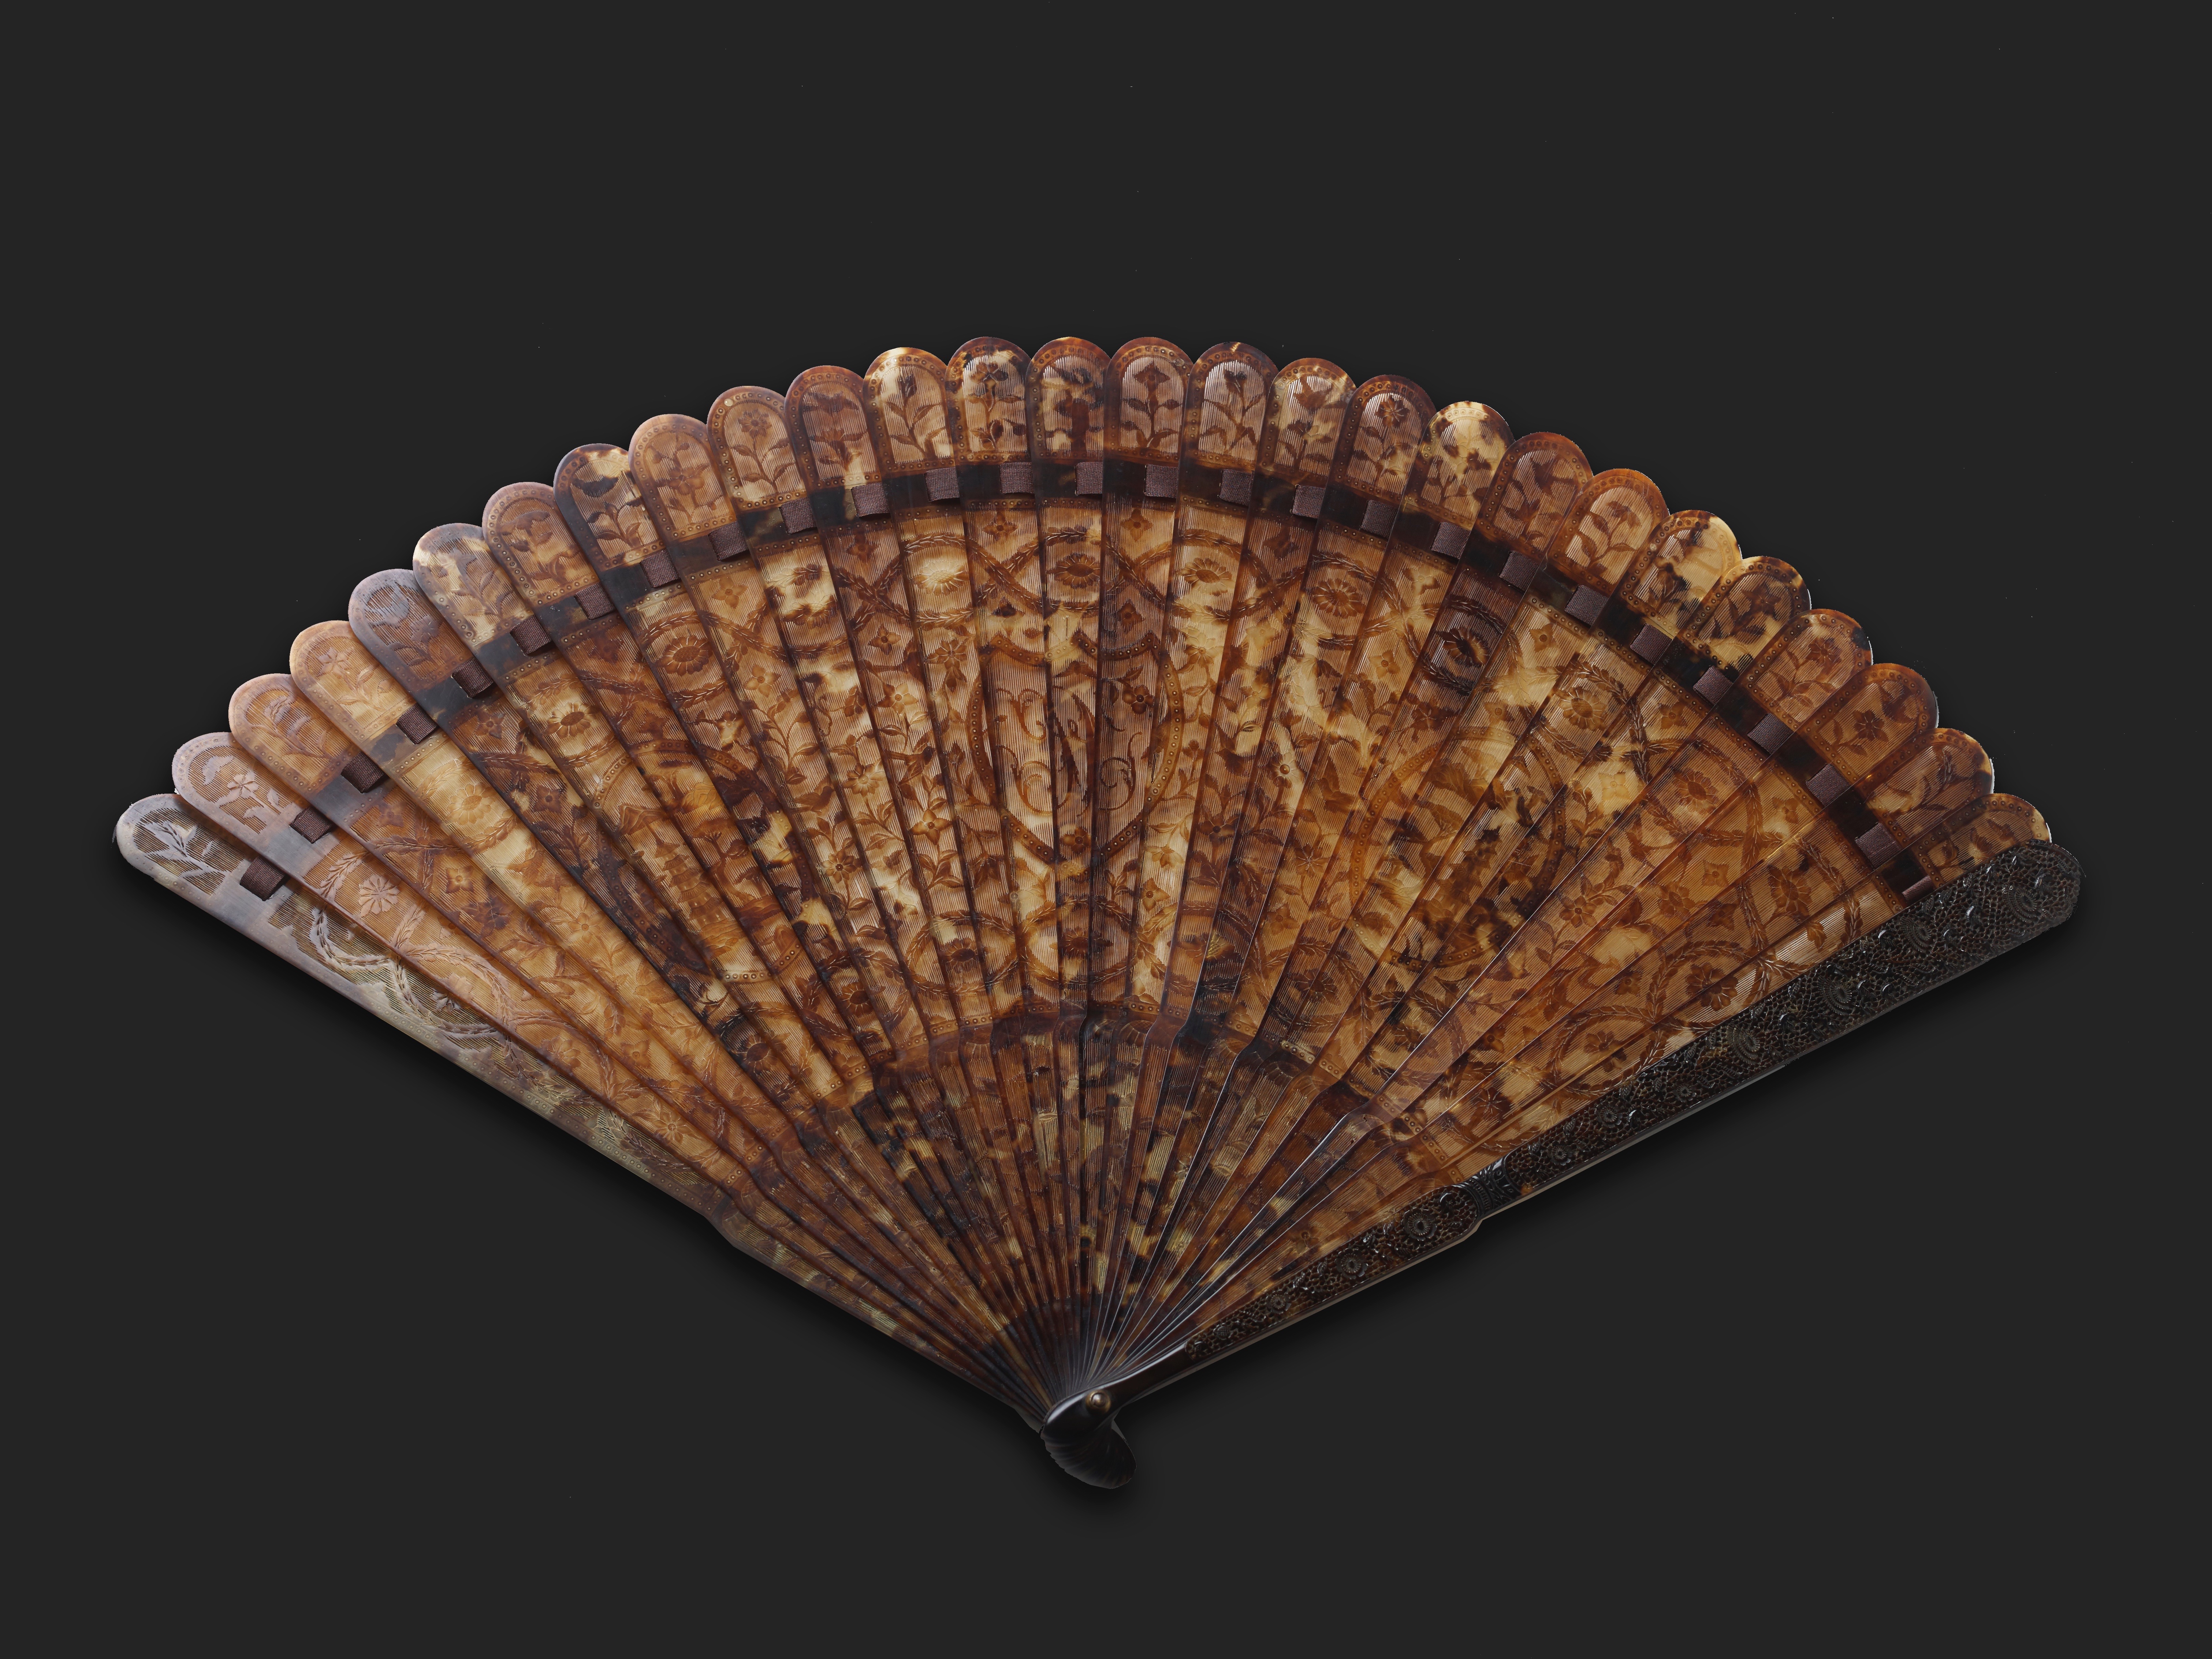 A FINE AND RARE CHINESE EXPORT CARVED TORTOISESHELL BRISE FAN, CIRCA 1780-1790 - Image 2 of 3